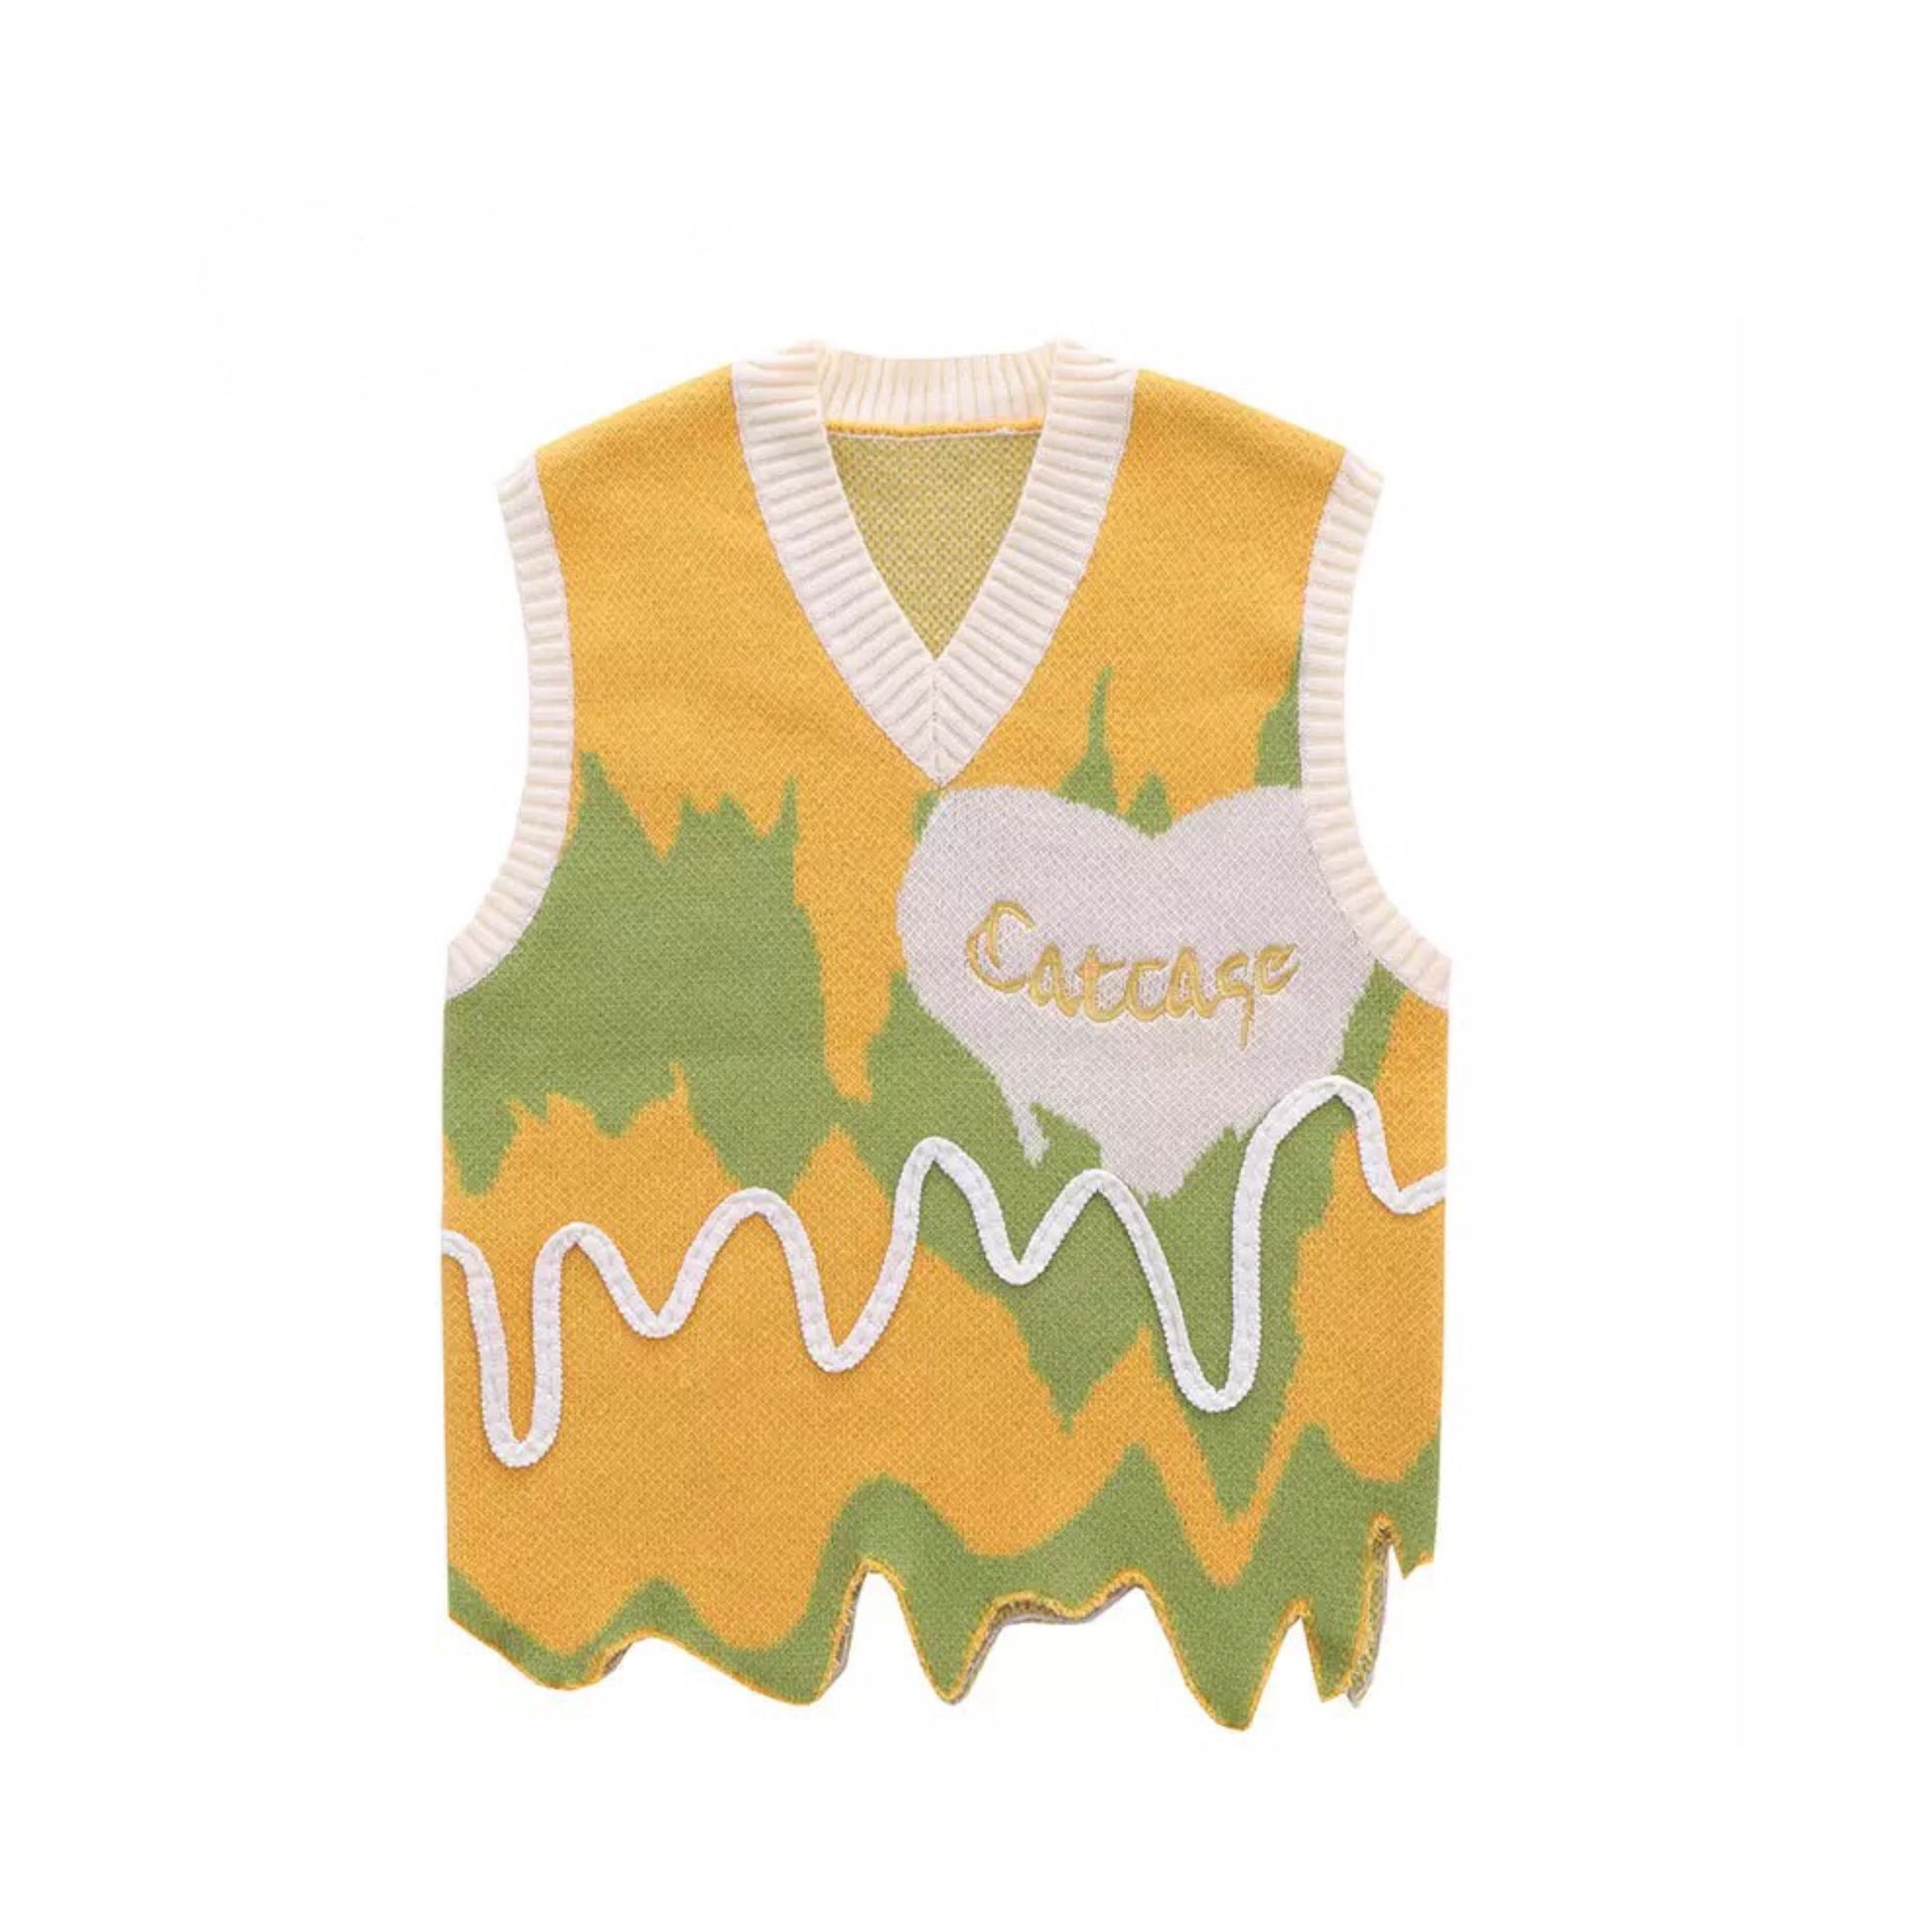 Catcase Slime Pullover Vest | Knitted Sweater Vests | Y2K Clothing | H0NEYBEAR